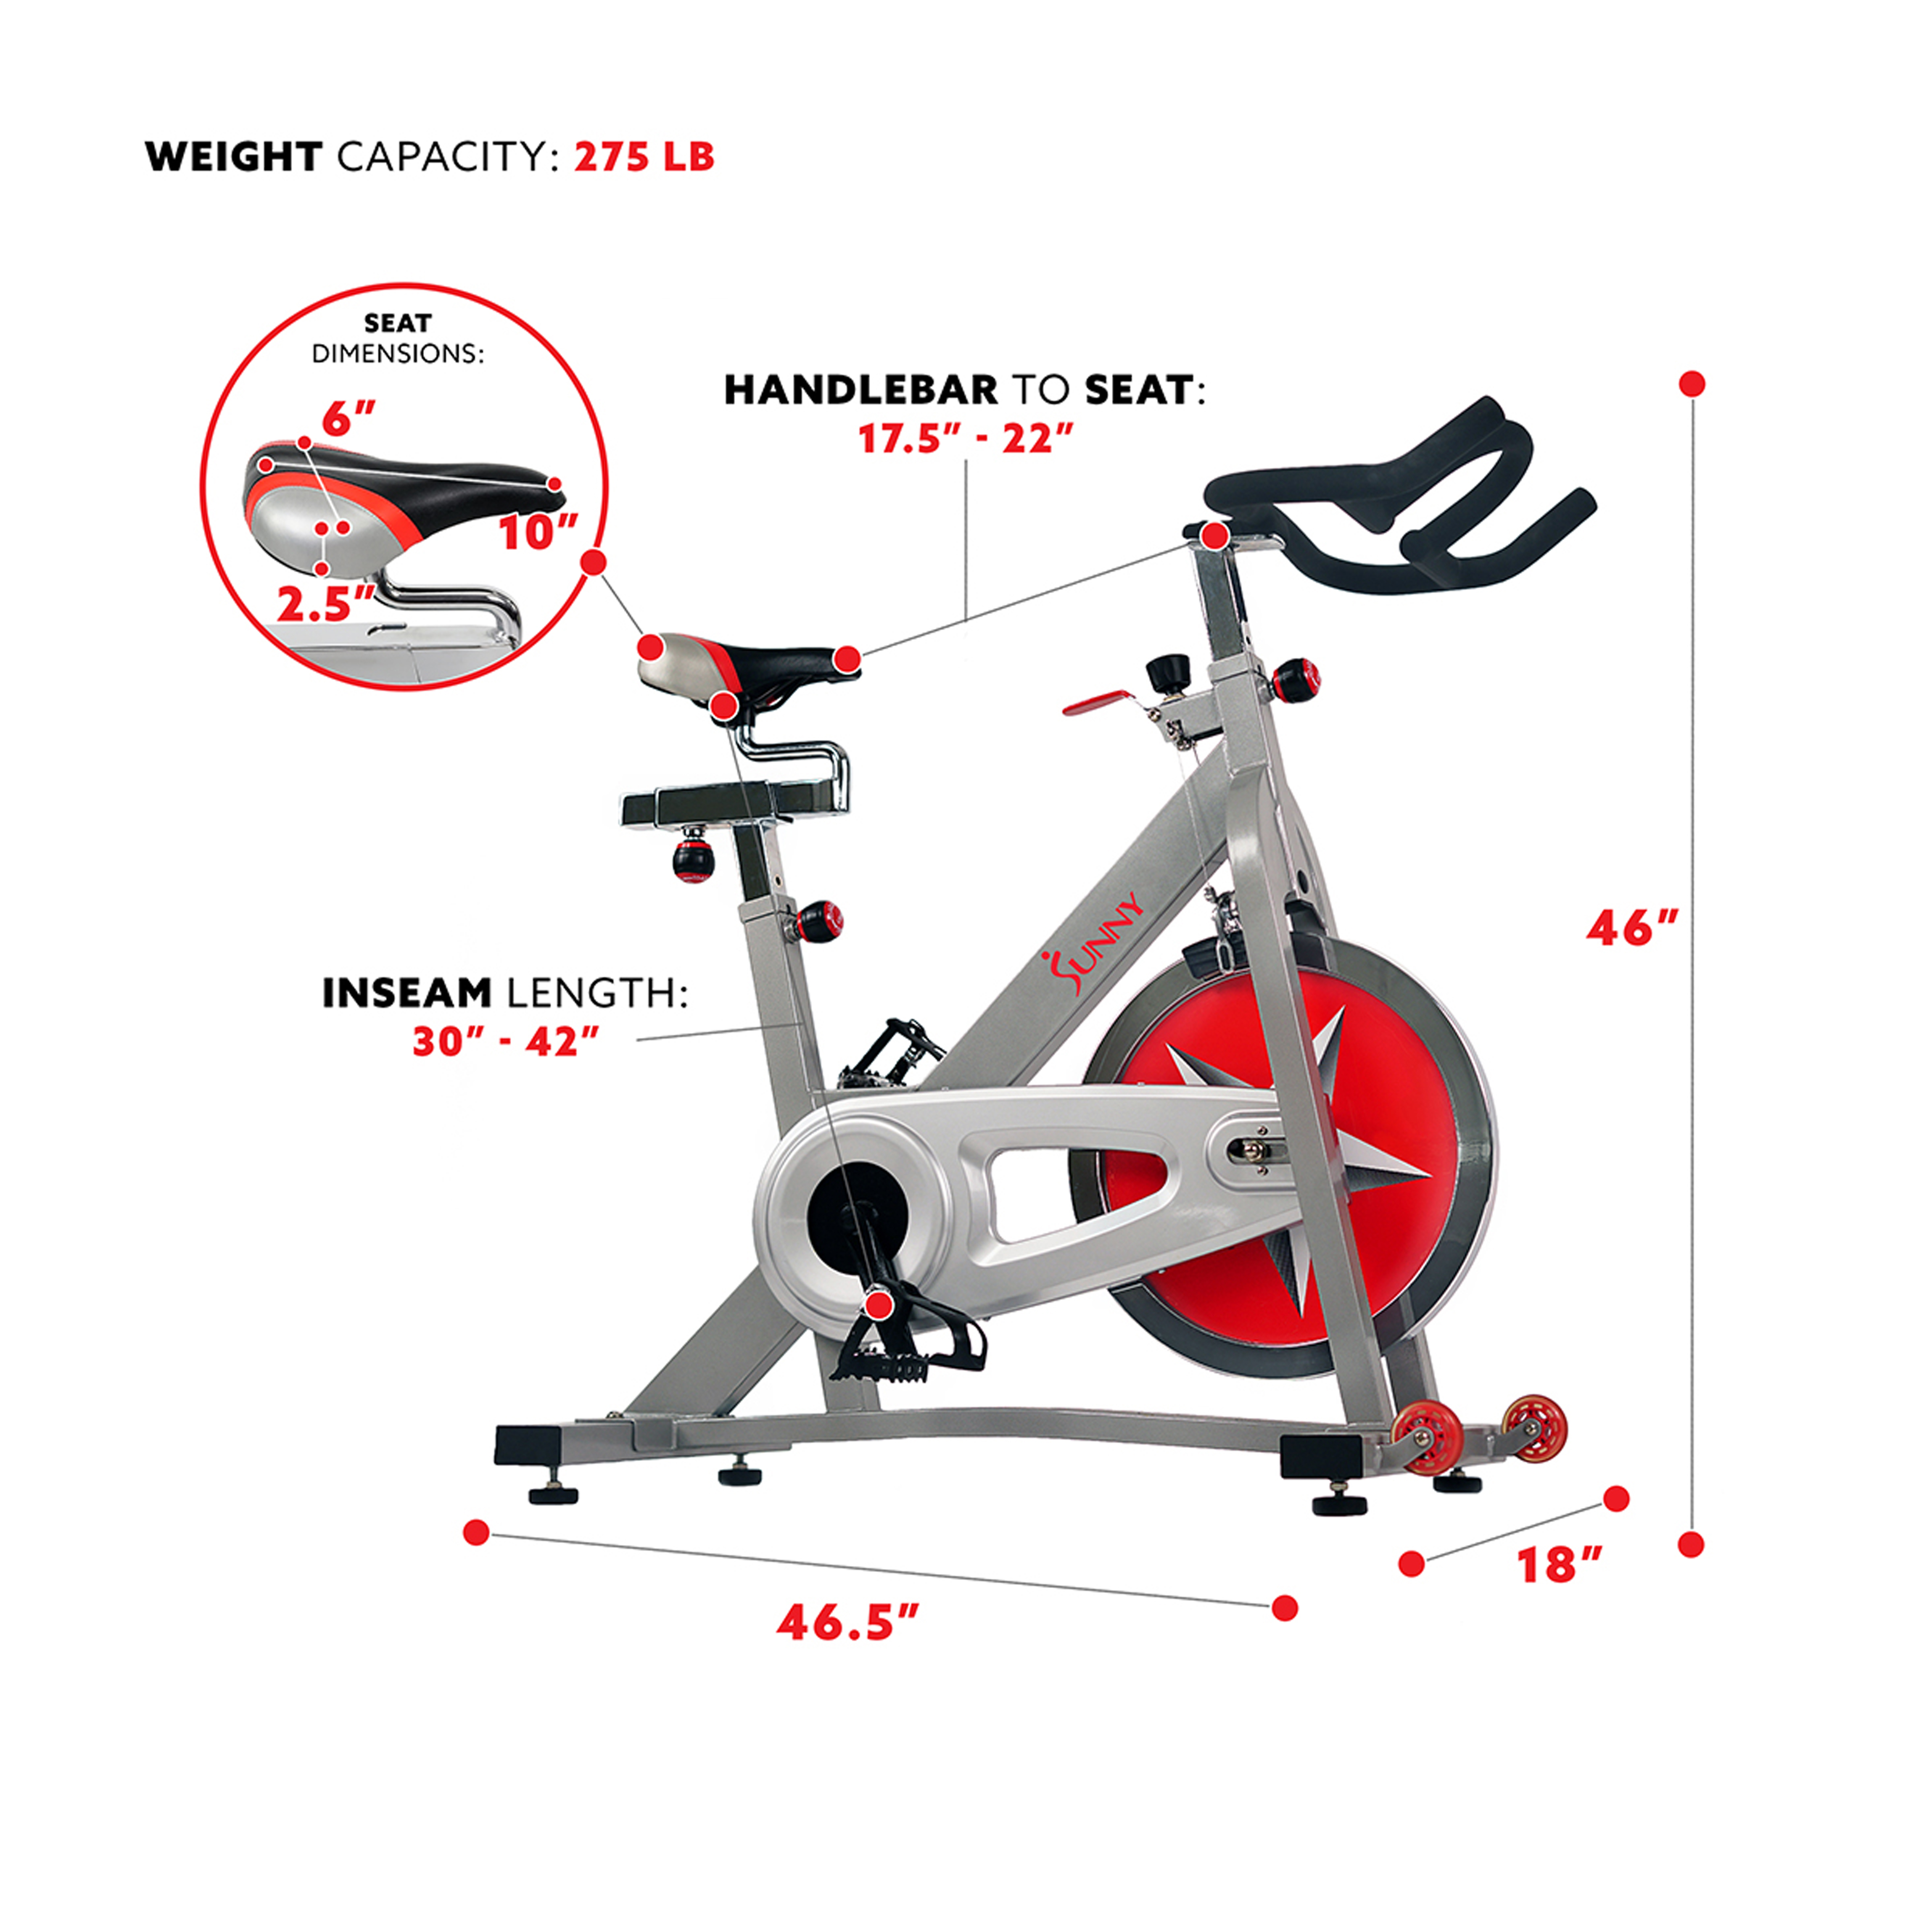 Sunny Health & Fitness Stationary Chain Drive 40 lb Flywheel Pro Indoor Cycling Exercise Bike Trainer, Workout Machine, SF-B901 - image 6 of 9